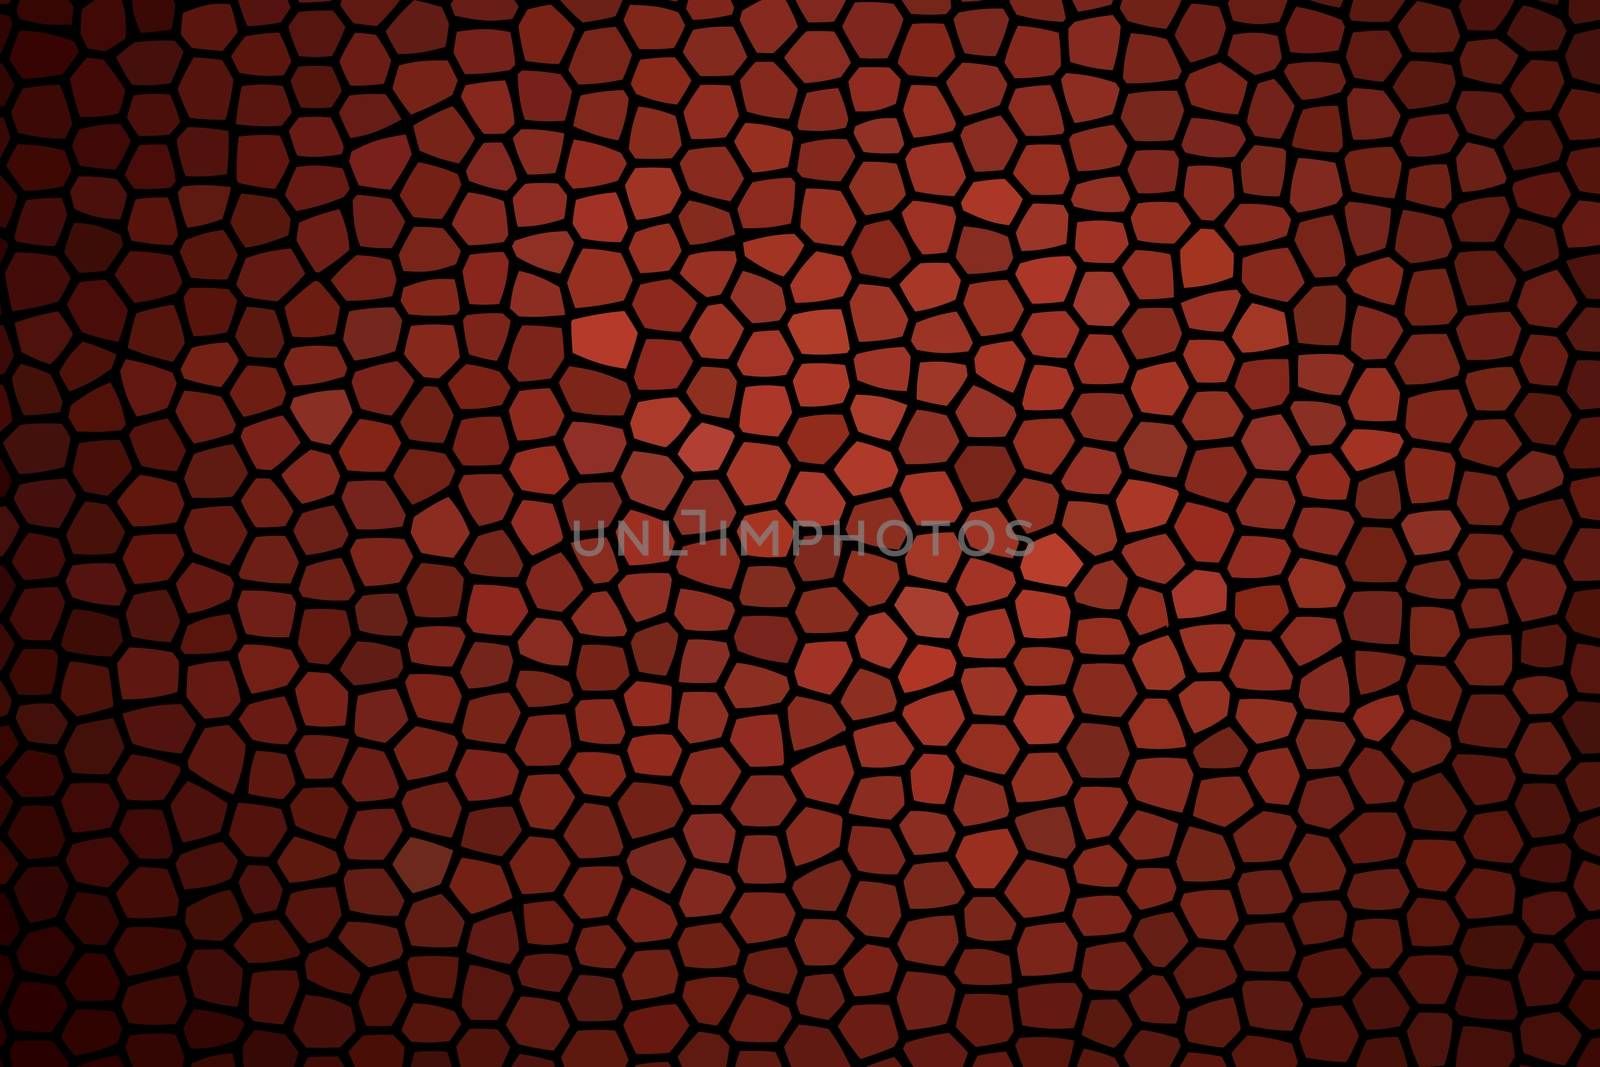 Abstract Red pebble on black background. For decoration, printing, cover, design. by peerapixs